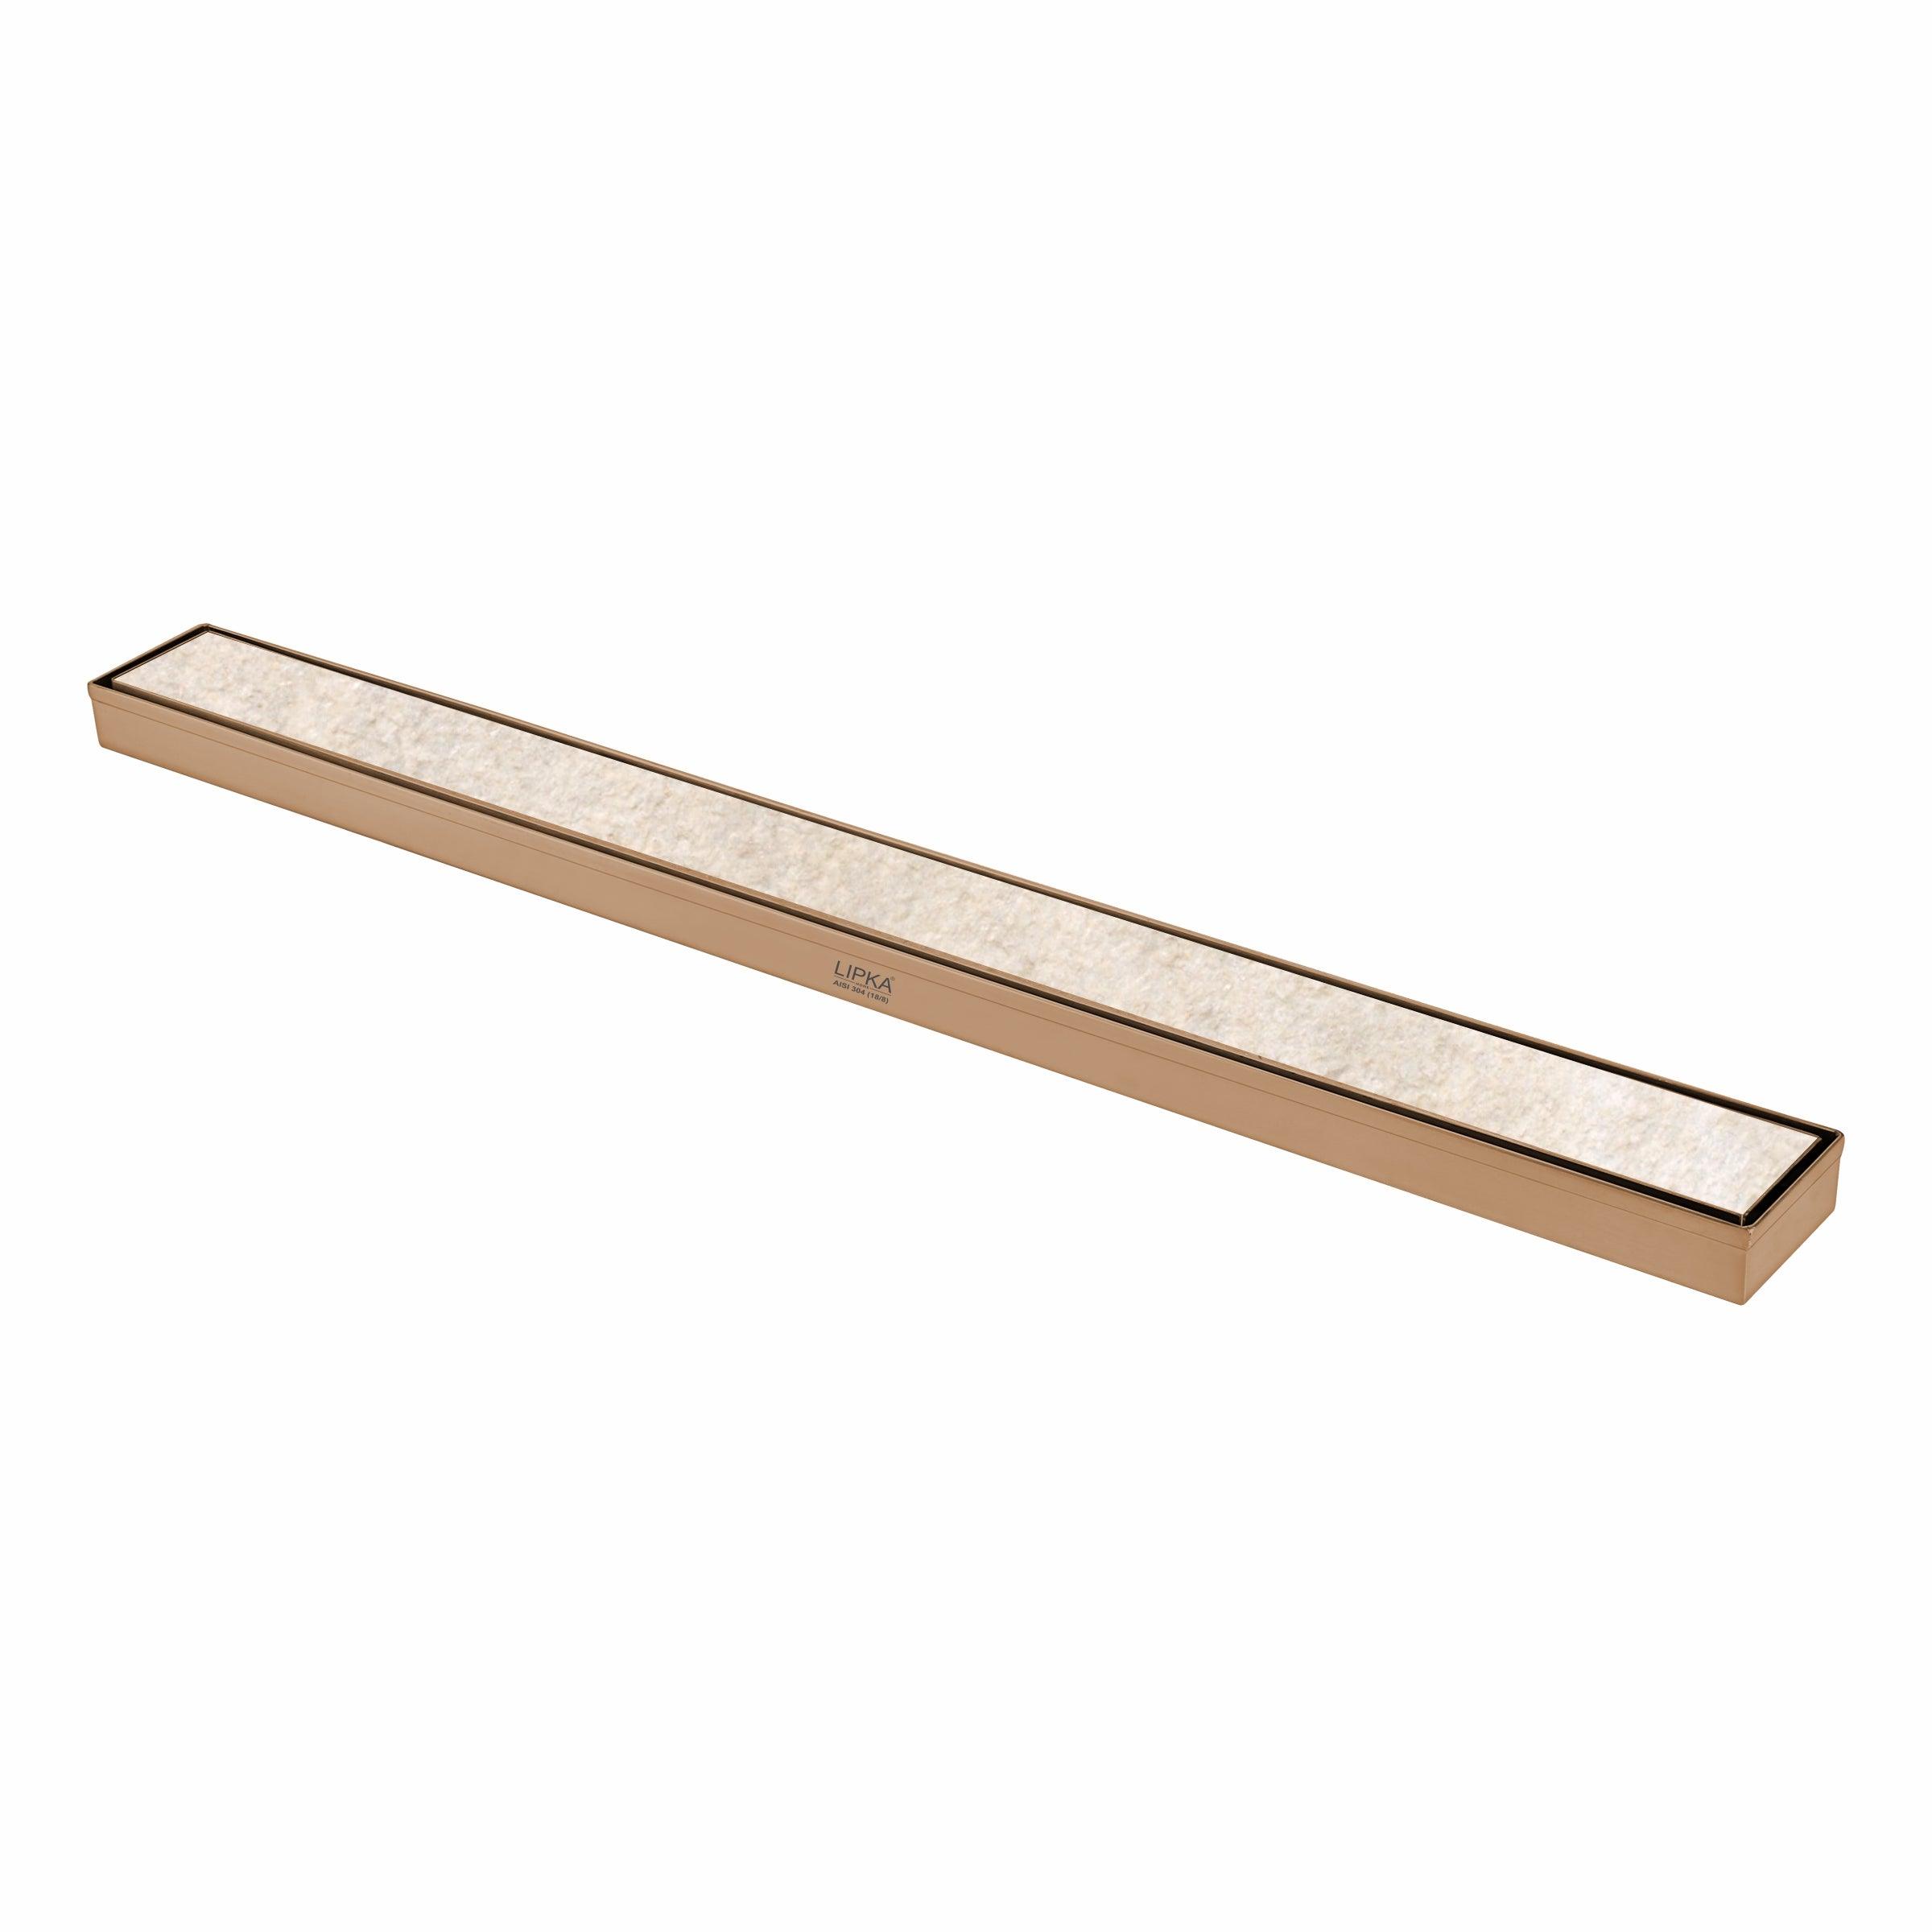 Marble Insert Shower Drain Channel - Antique Copper (40 x 2 Inches)